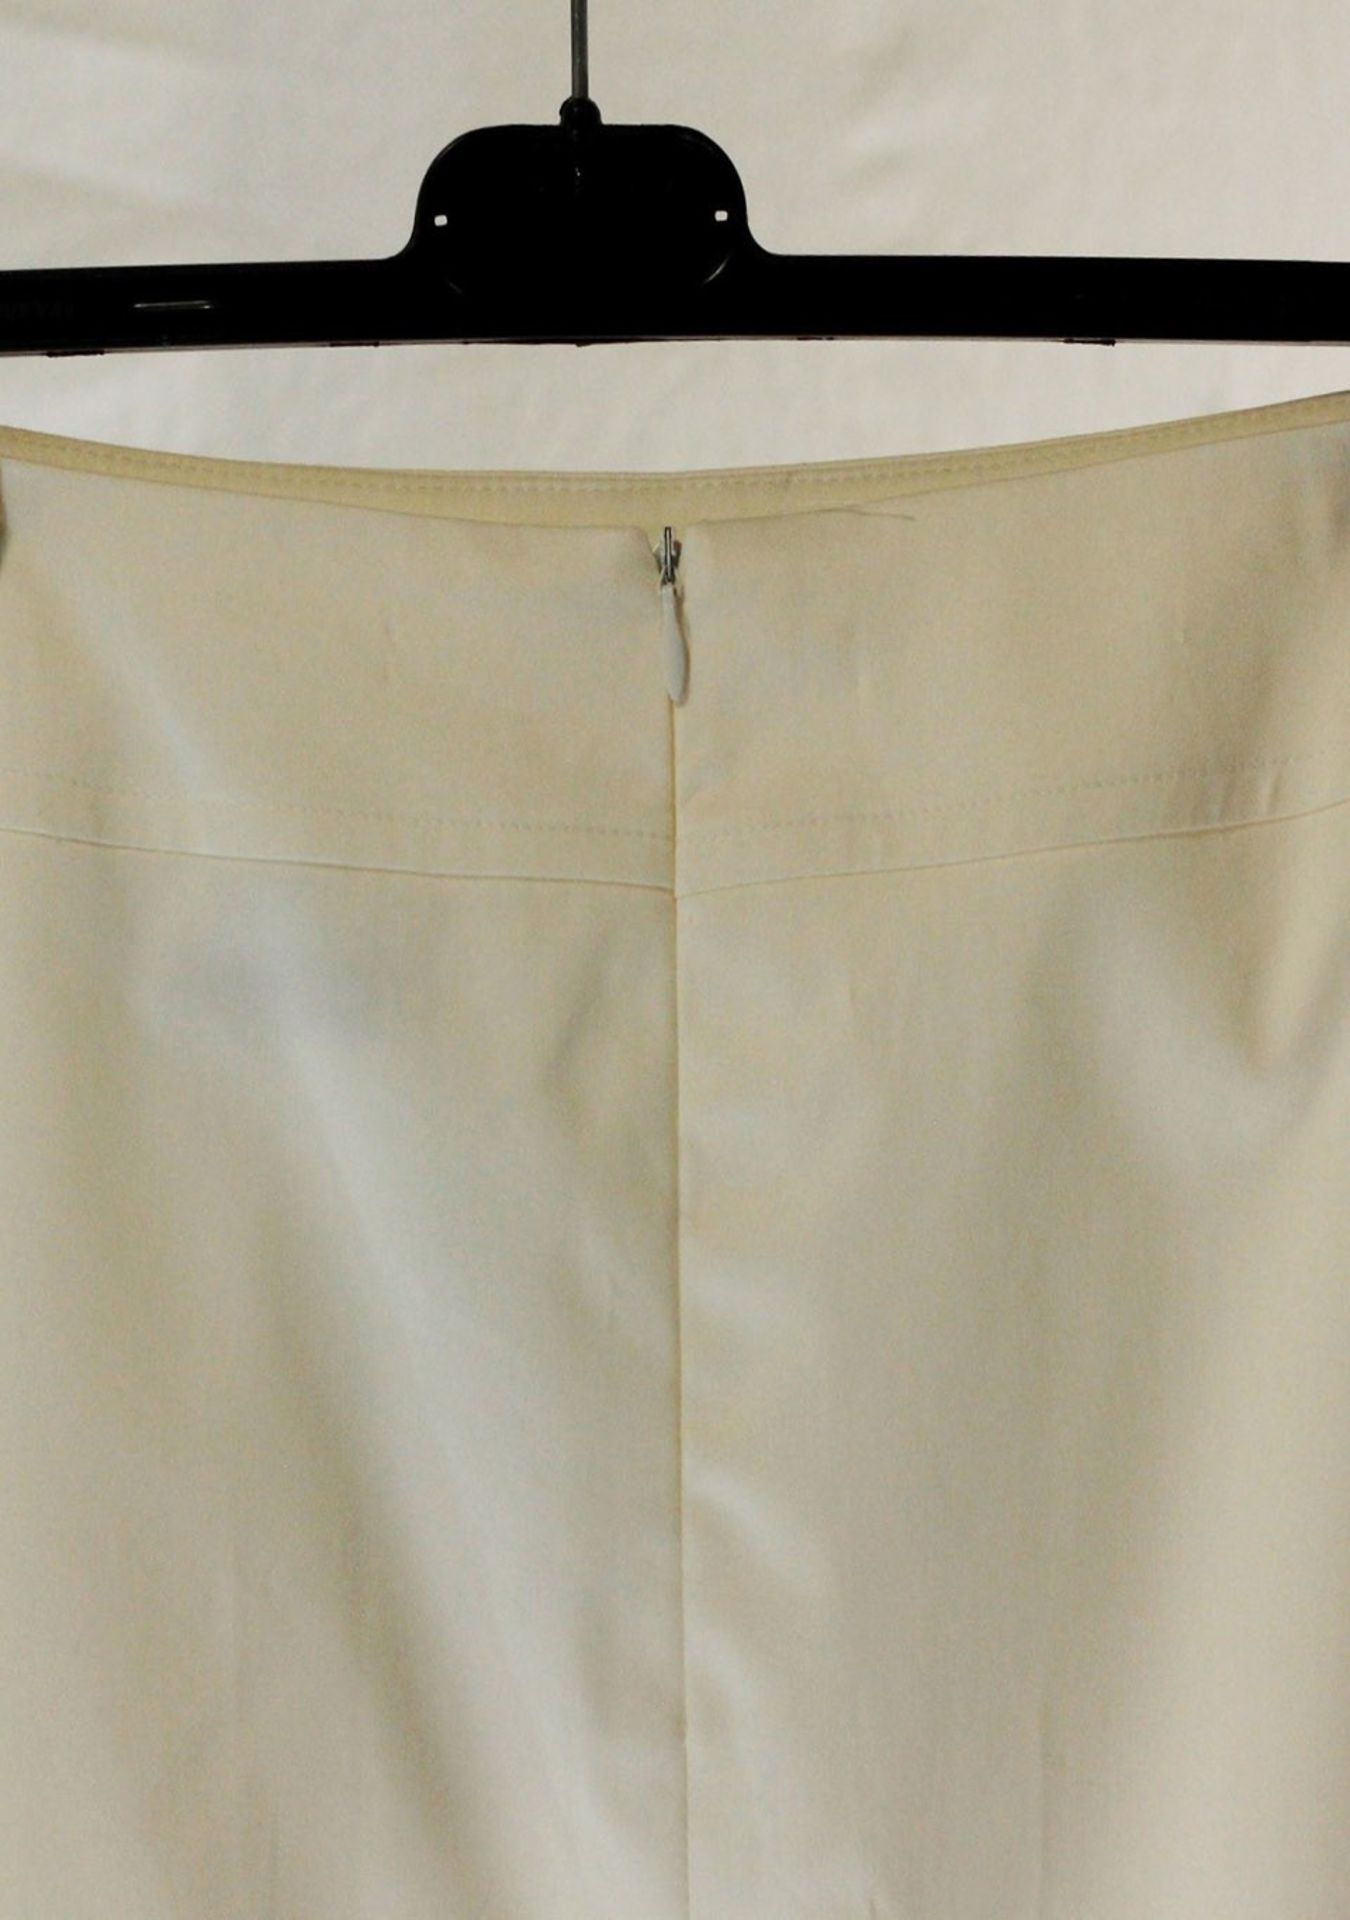 1 x Anne Belin White Skirt - Size: 14 - Material: 100% Cotton - From a High End Clothing Boutique In - Image 8 of 9